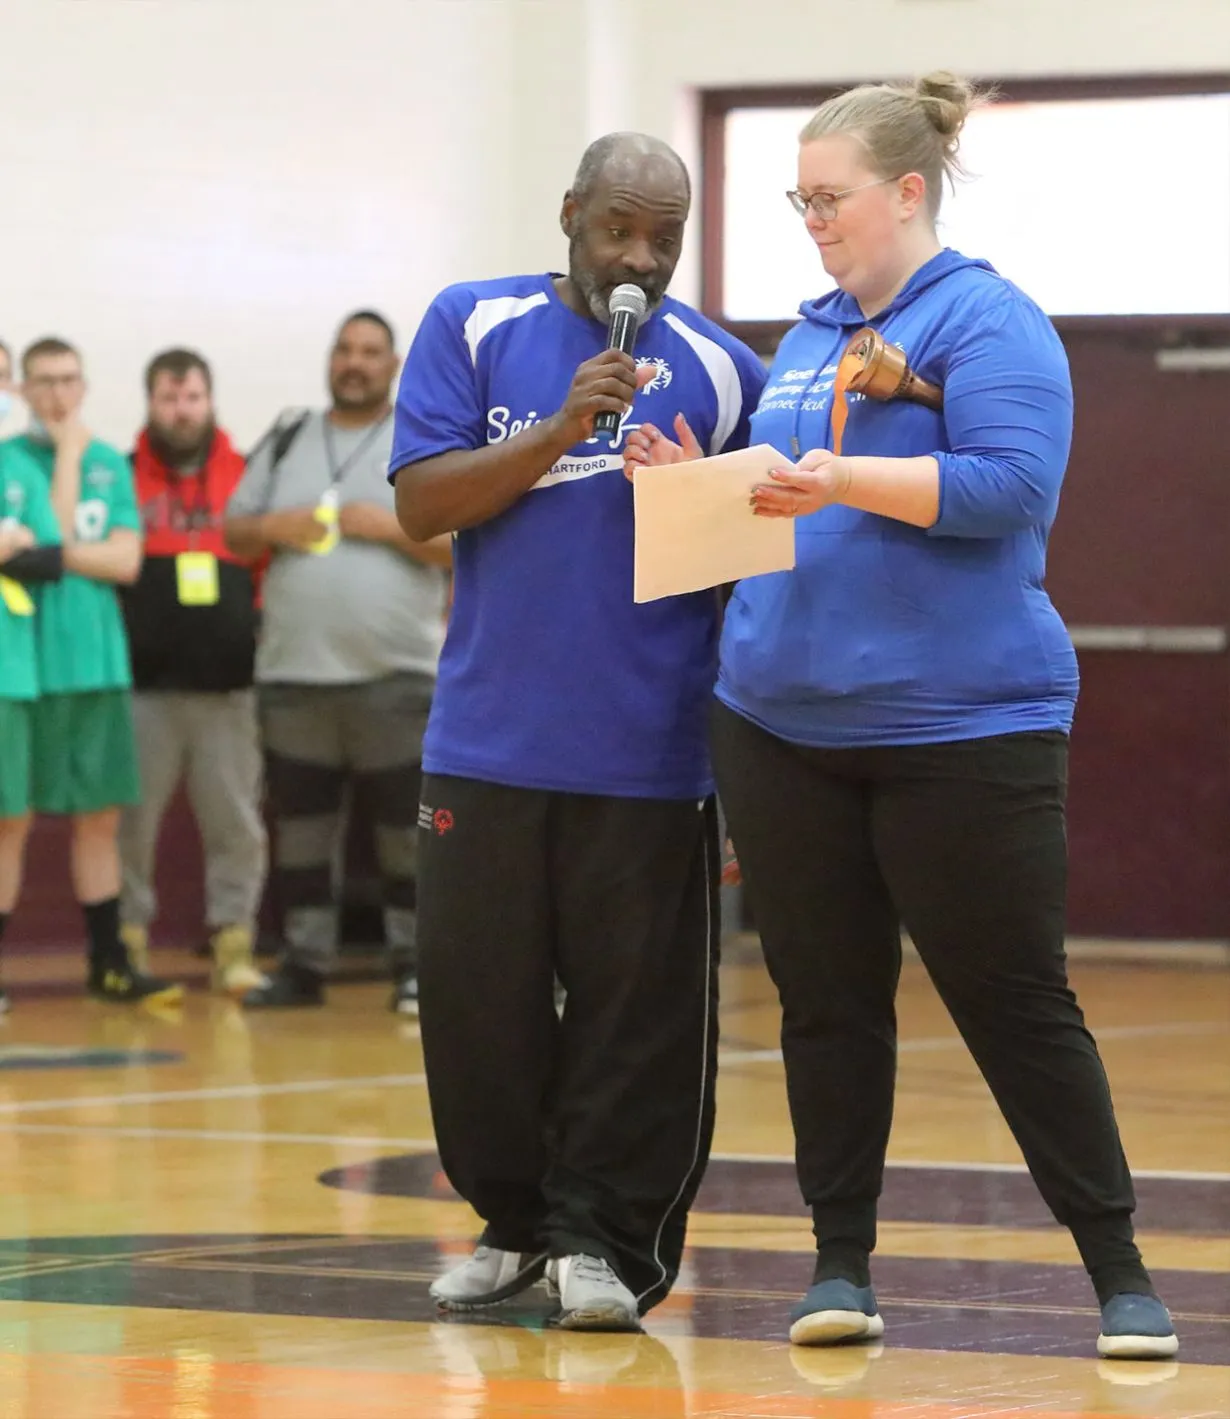 Male and female standing in the middle of a gymnasium wearing blue tops and speaking into a microphone.